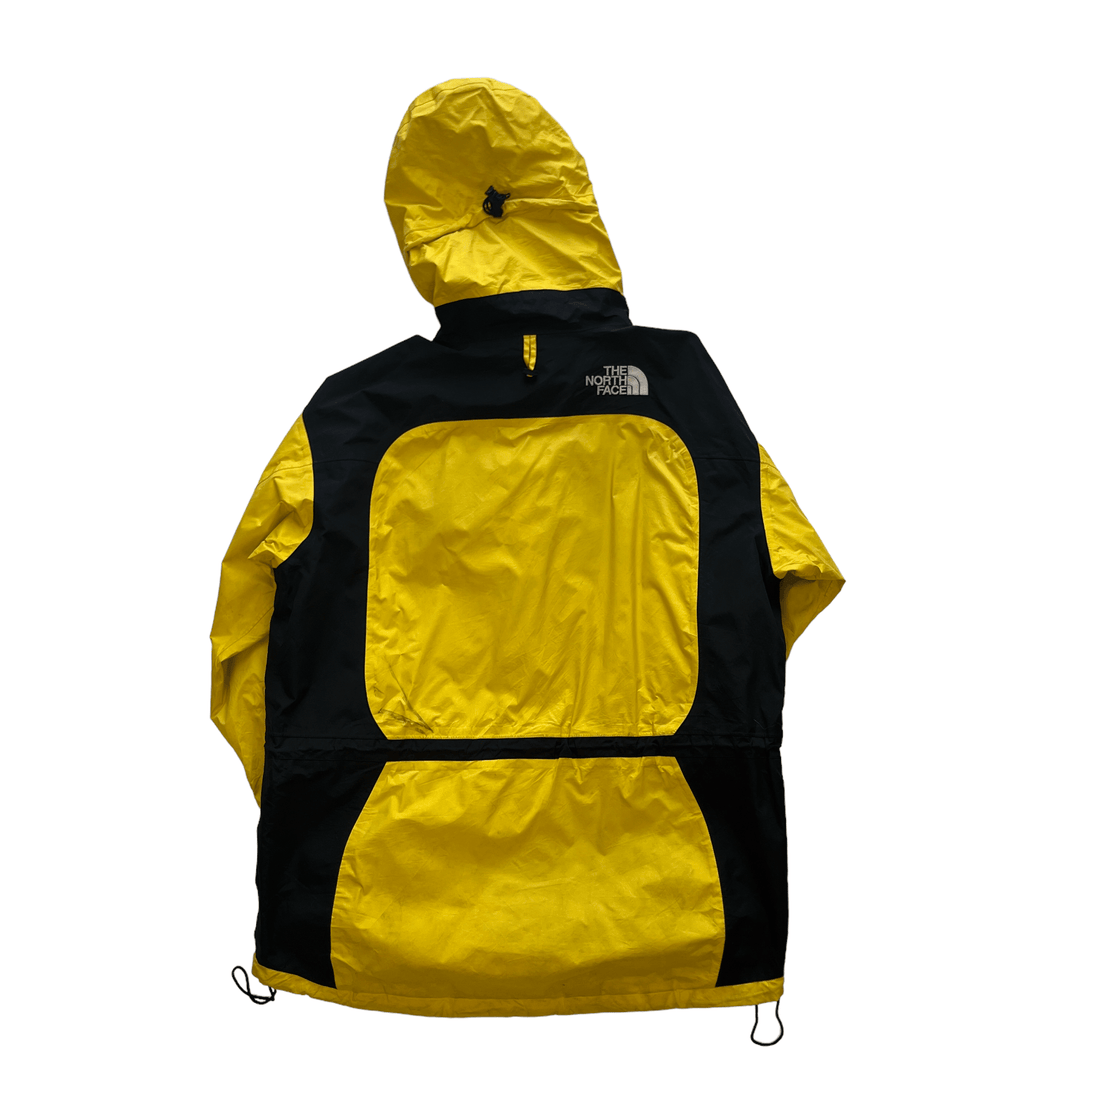 Vintage Black + Yellow The North Face (TNF) Gore-Tex Jacket - Large - The Streetwear Studio